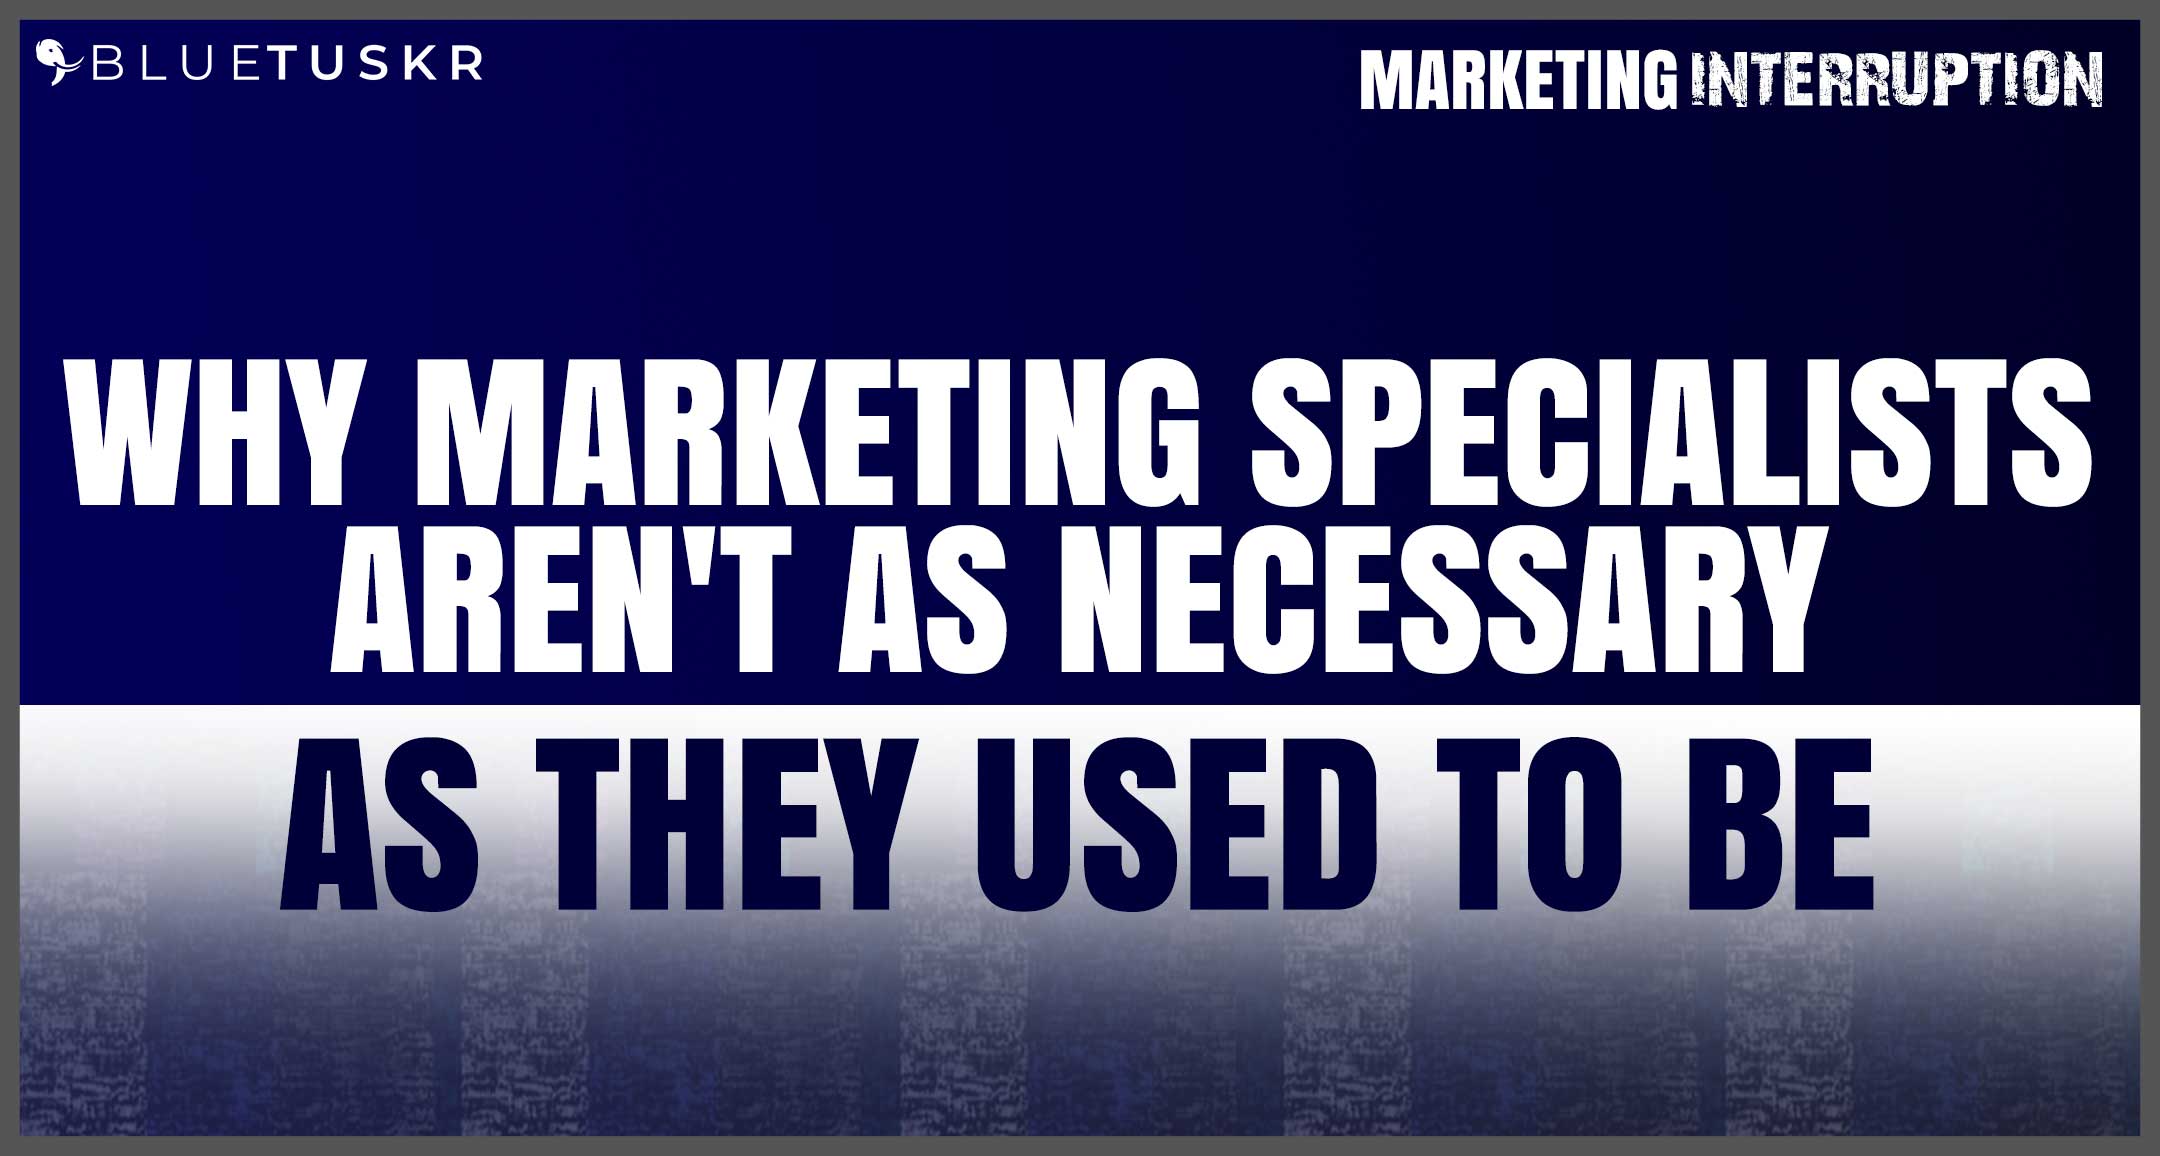 Why Marketing Specialist Aren't as Necessary as They Used To Be